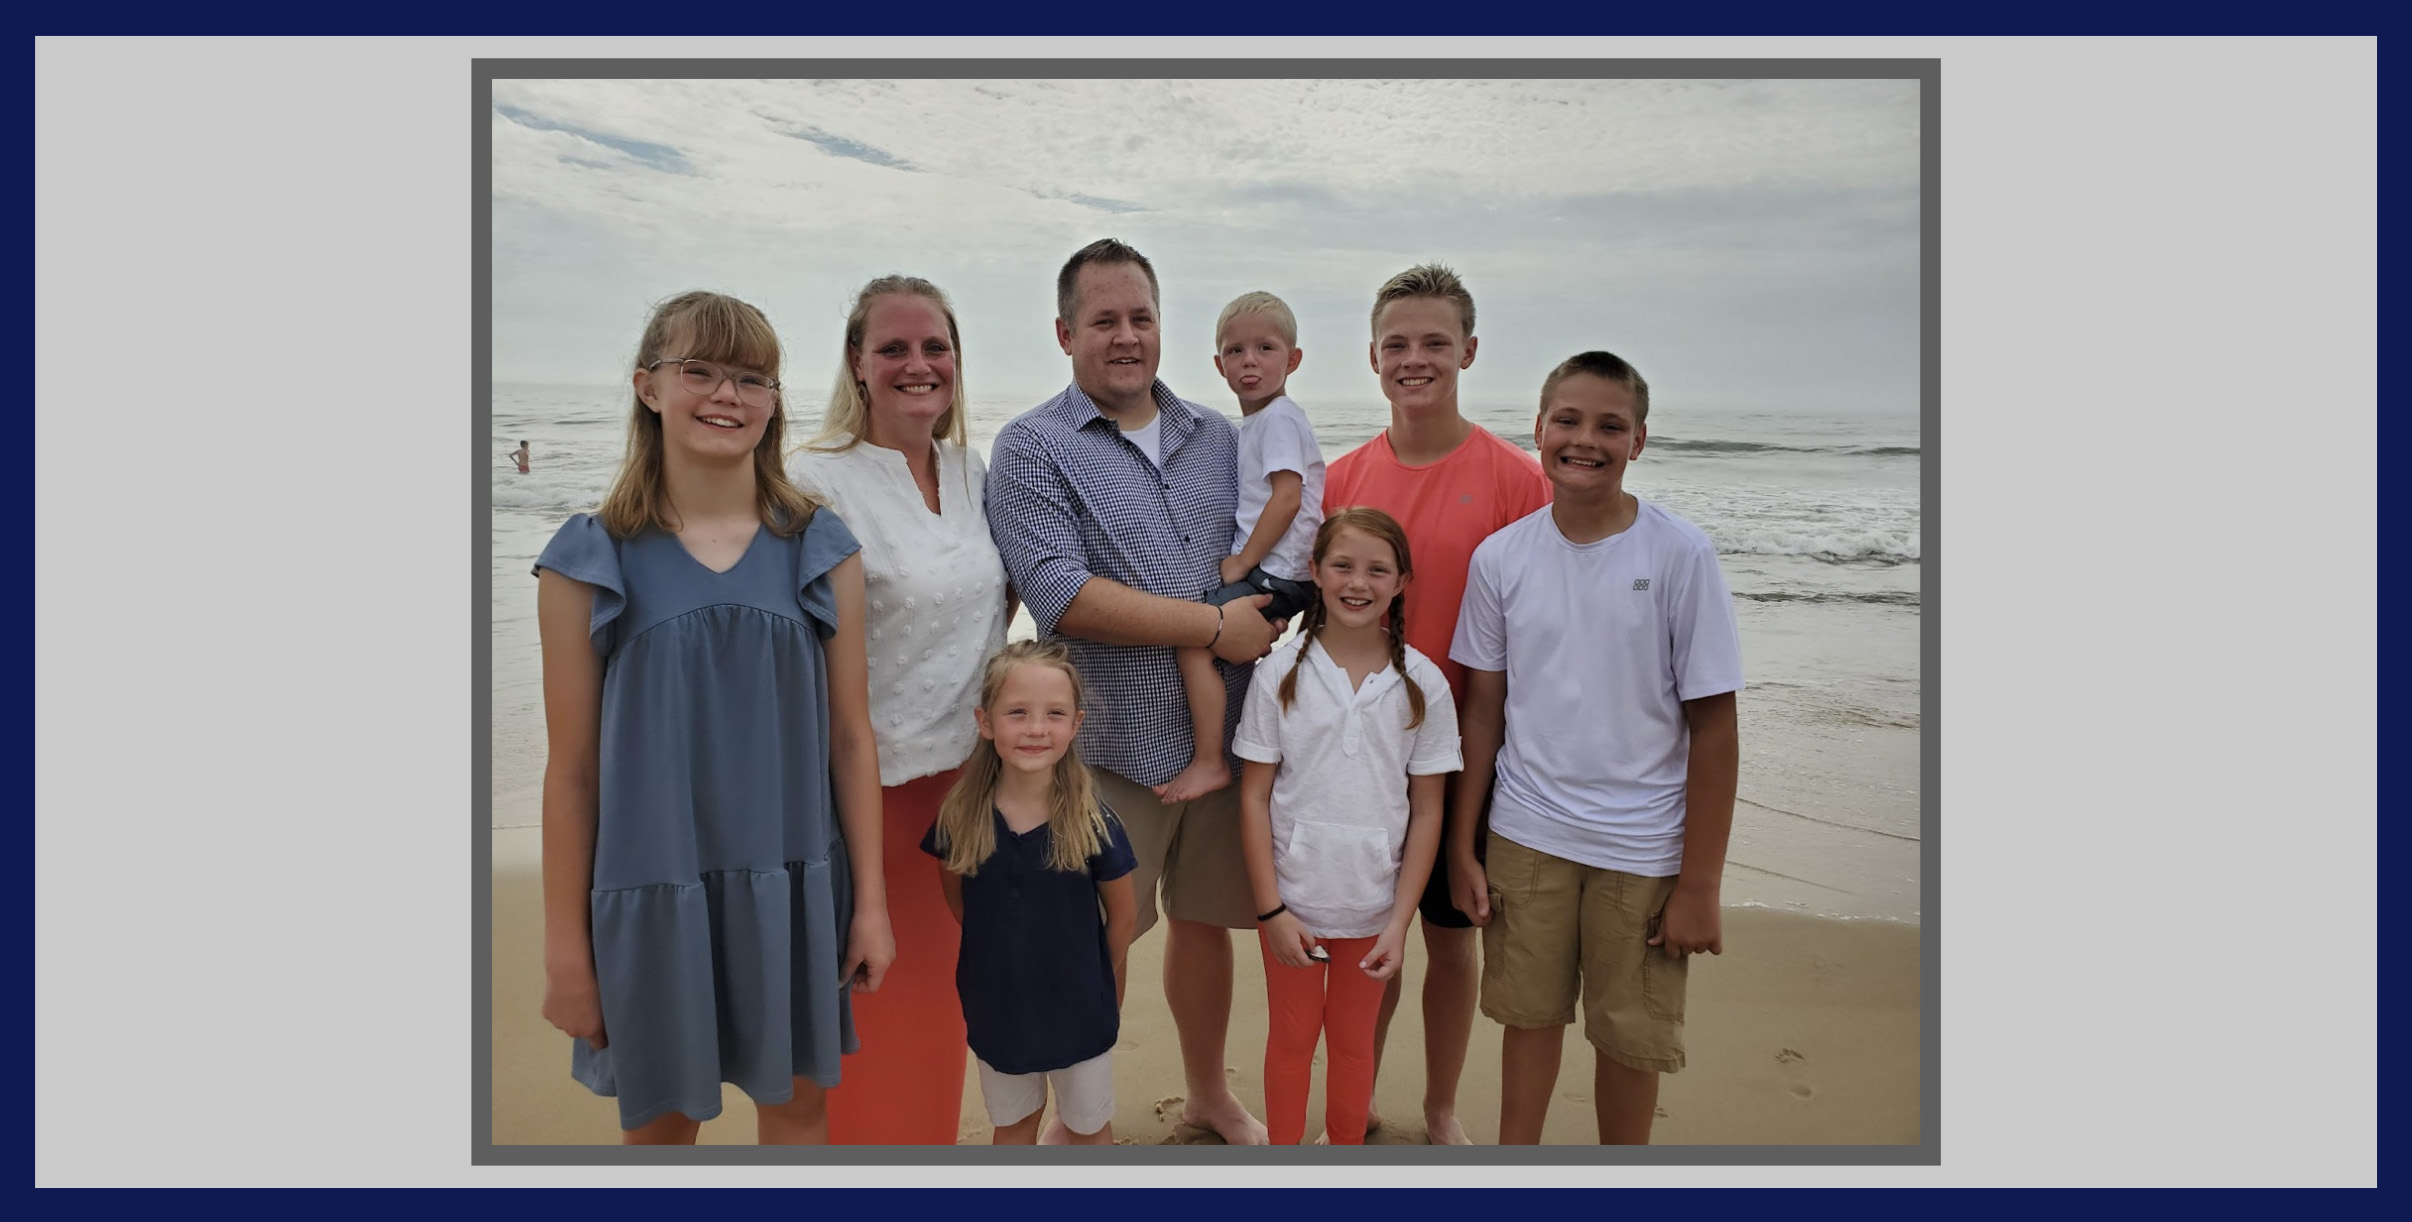 Mrs. Monn and with her family at the beach